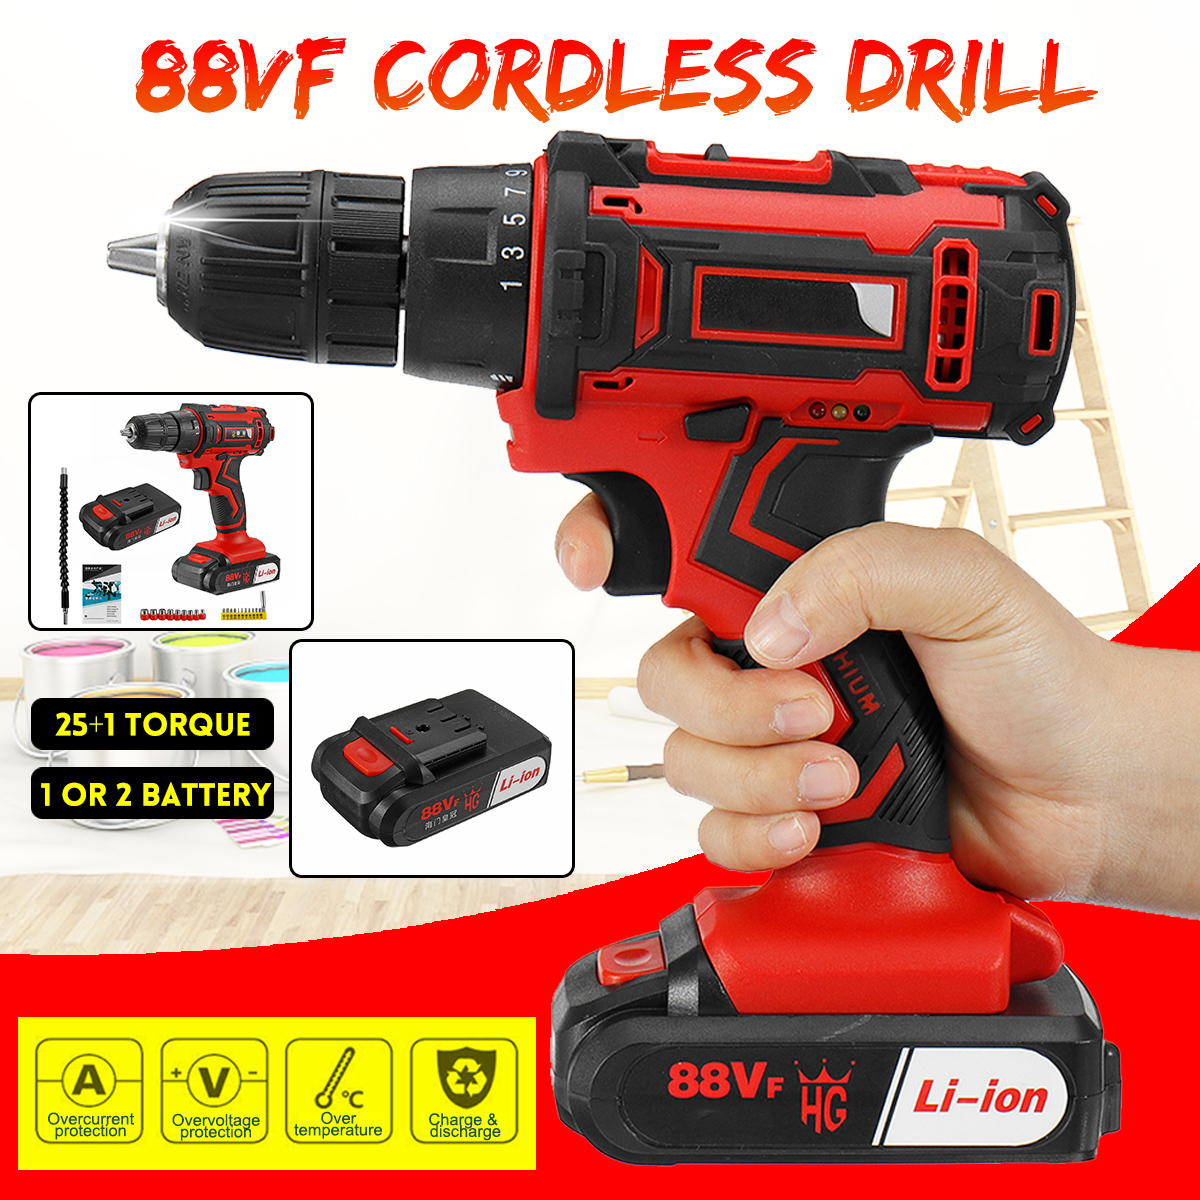 88VF-Cordless-Electric-Drill-Driver-251-Gears-Rechargeable-Screwdriver-W-12pcs-Battery--LED-Working--1847800-2